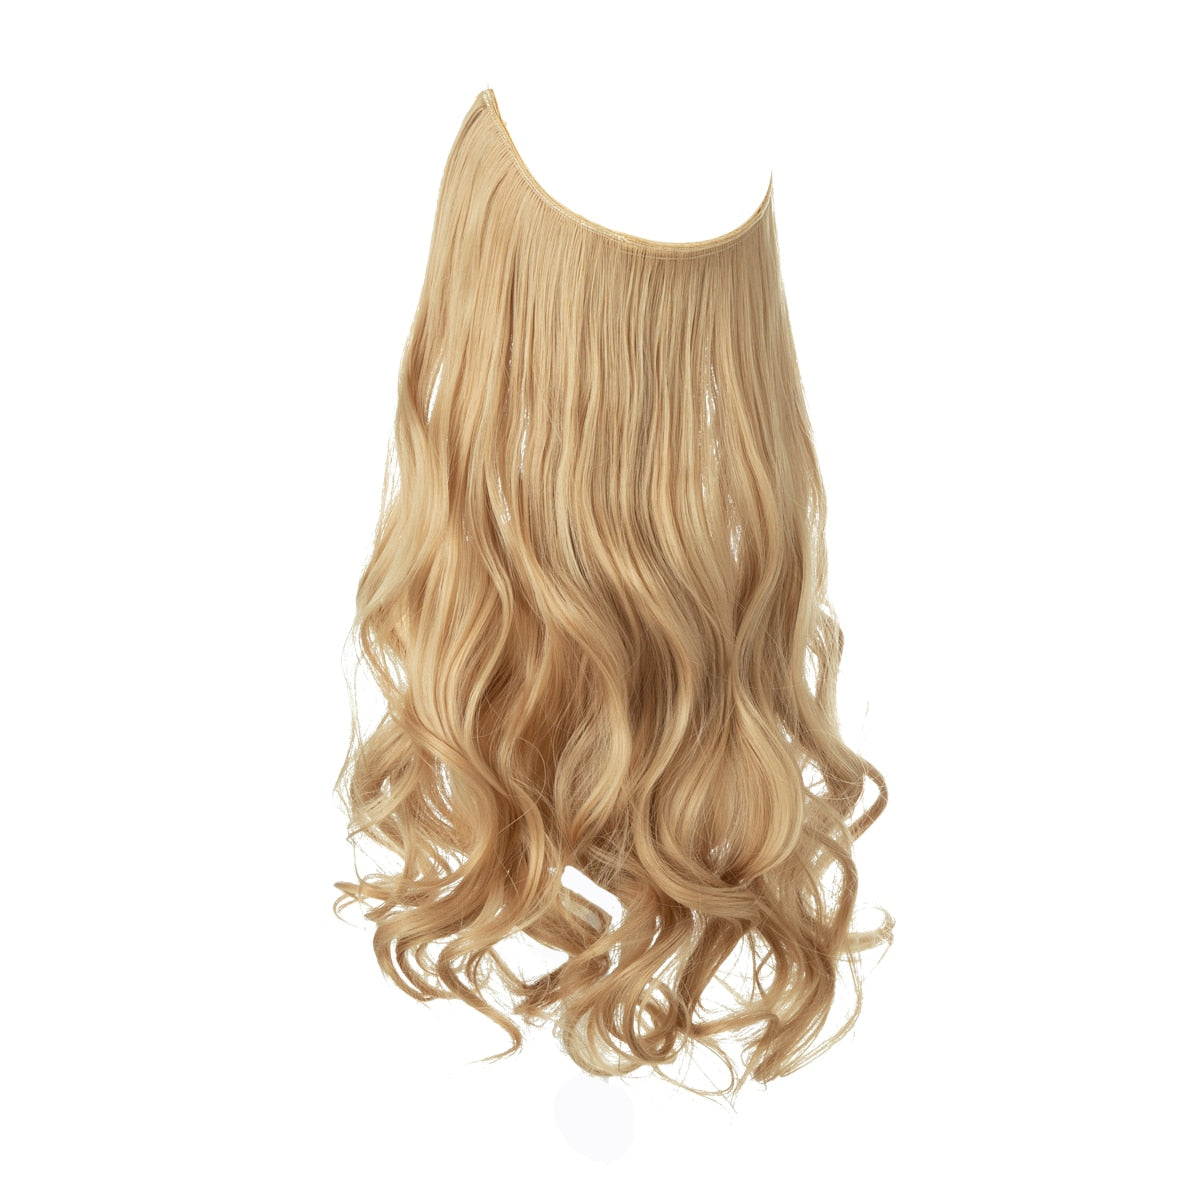 TEEK - Invisible Synth No Clip No Comb Wave Hair Extensions | Blonde Shades HAIR theteekdotcom Light Sandy Blonde 14inches 20-22 days